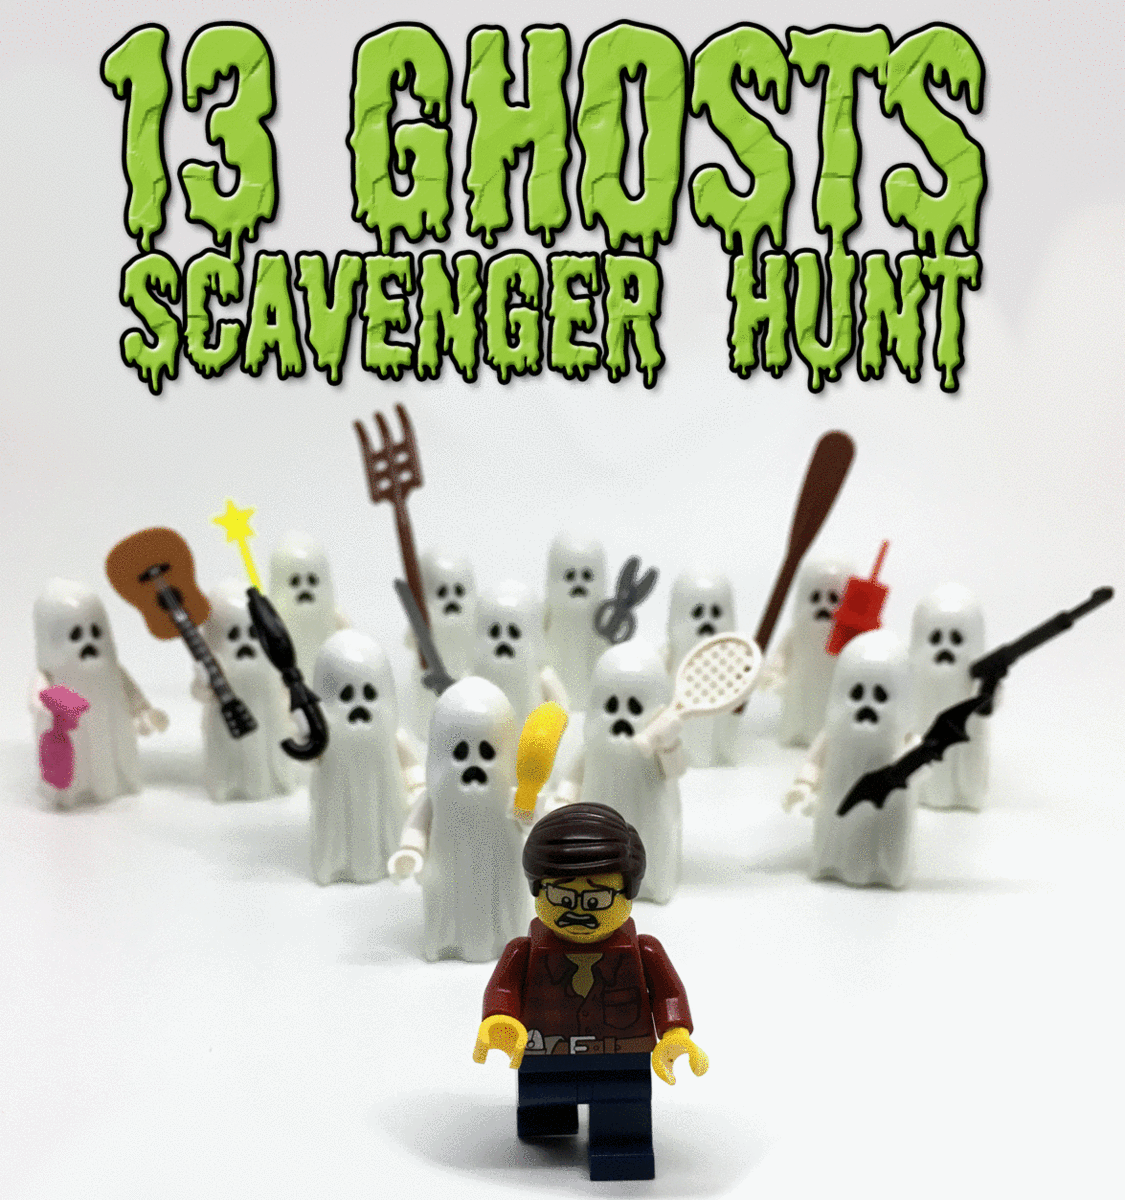 Friday the 13th scavenger hunt  Friday the 13th, Friday the 13th